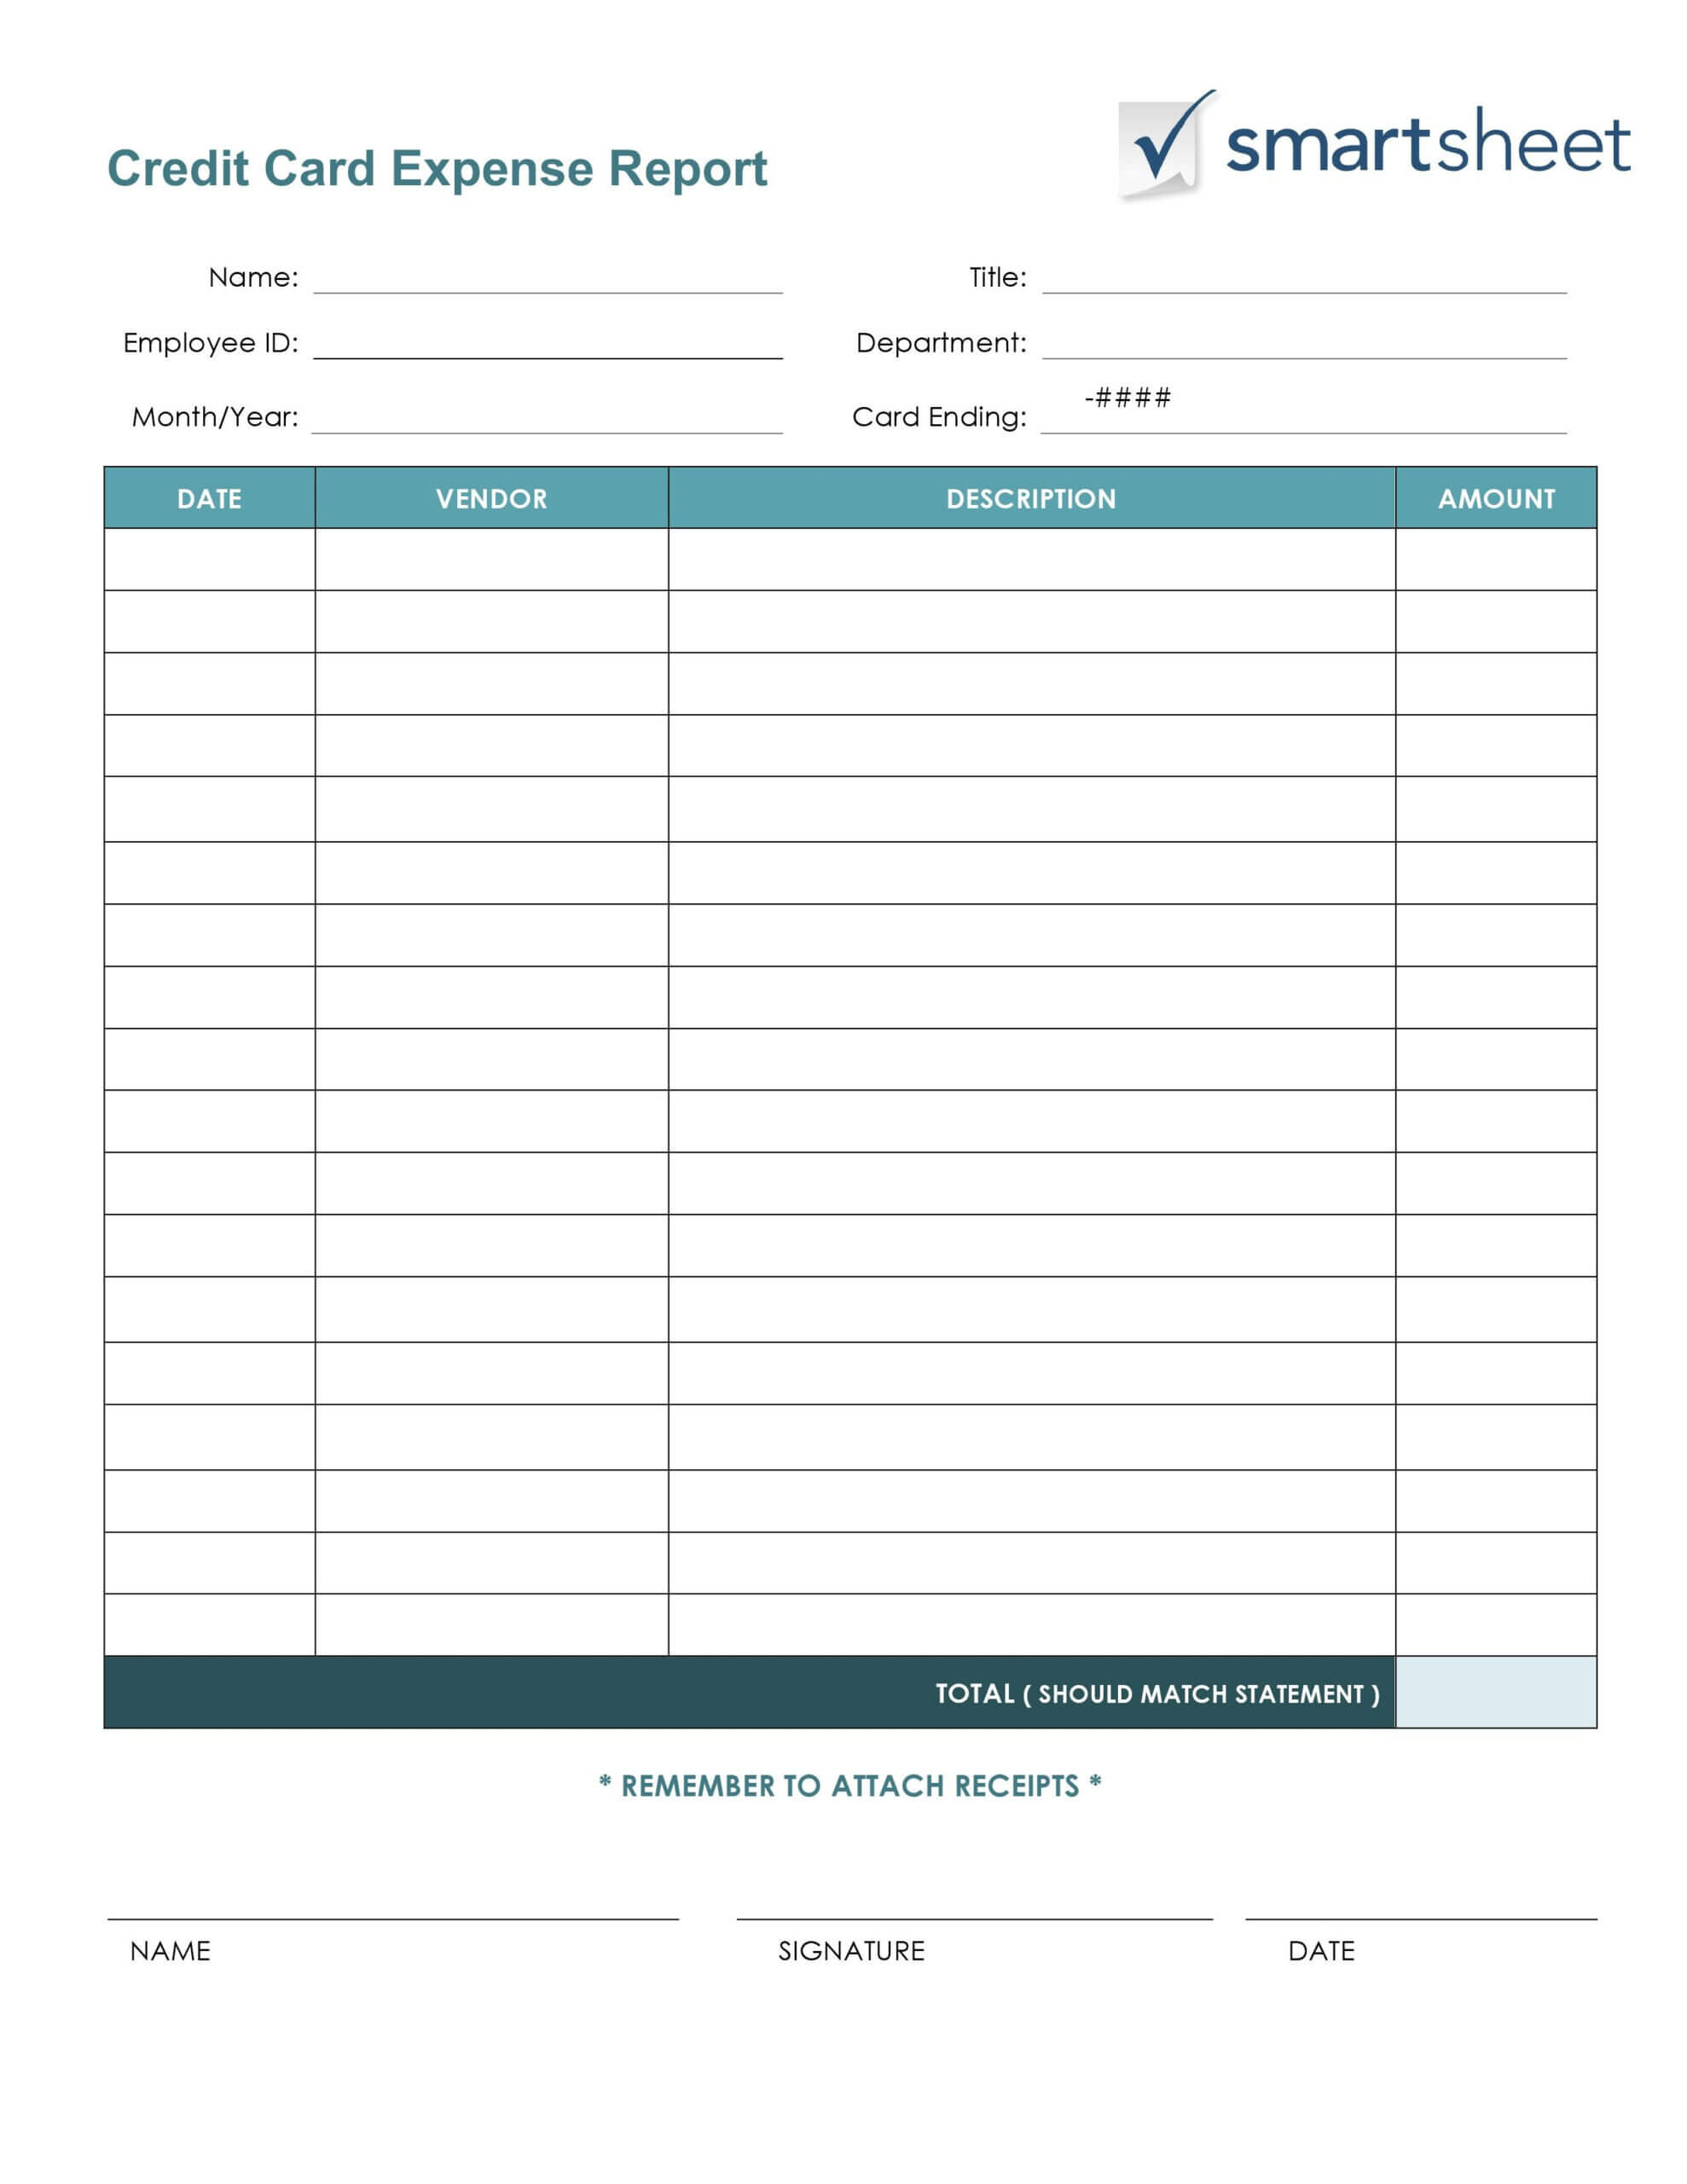 New Daily Expenses Excel Template #exceltemplate #xls Regarding Boyfriend Report Card Template